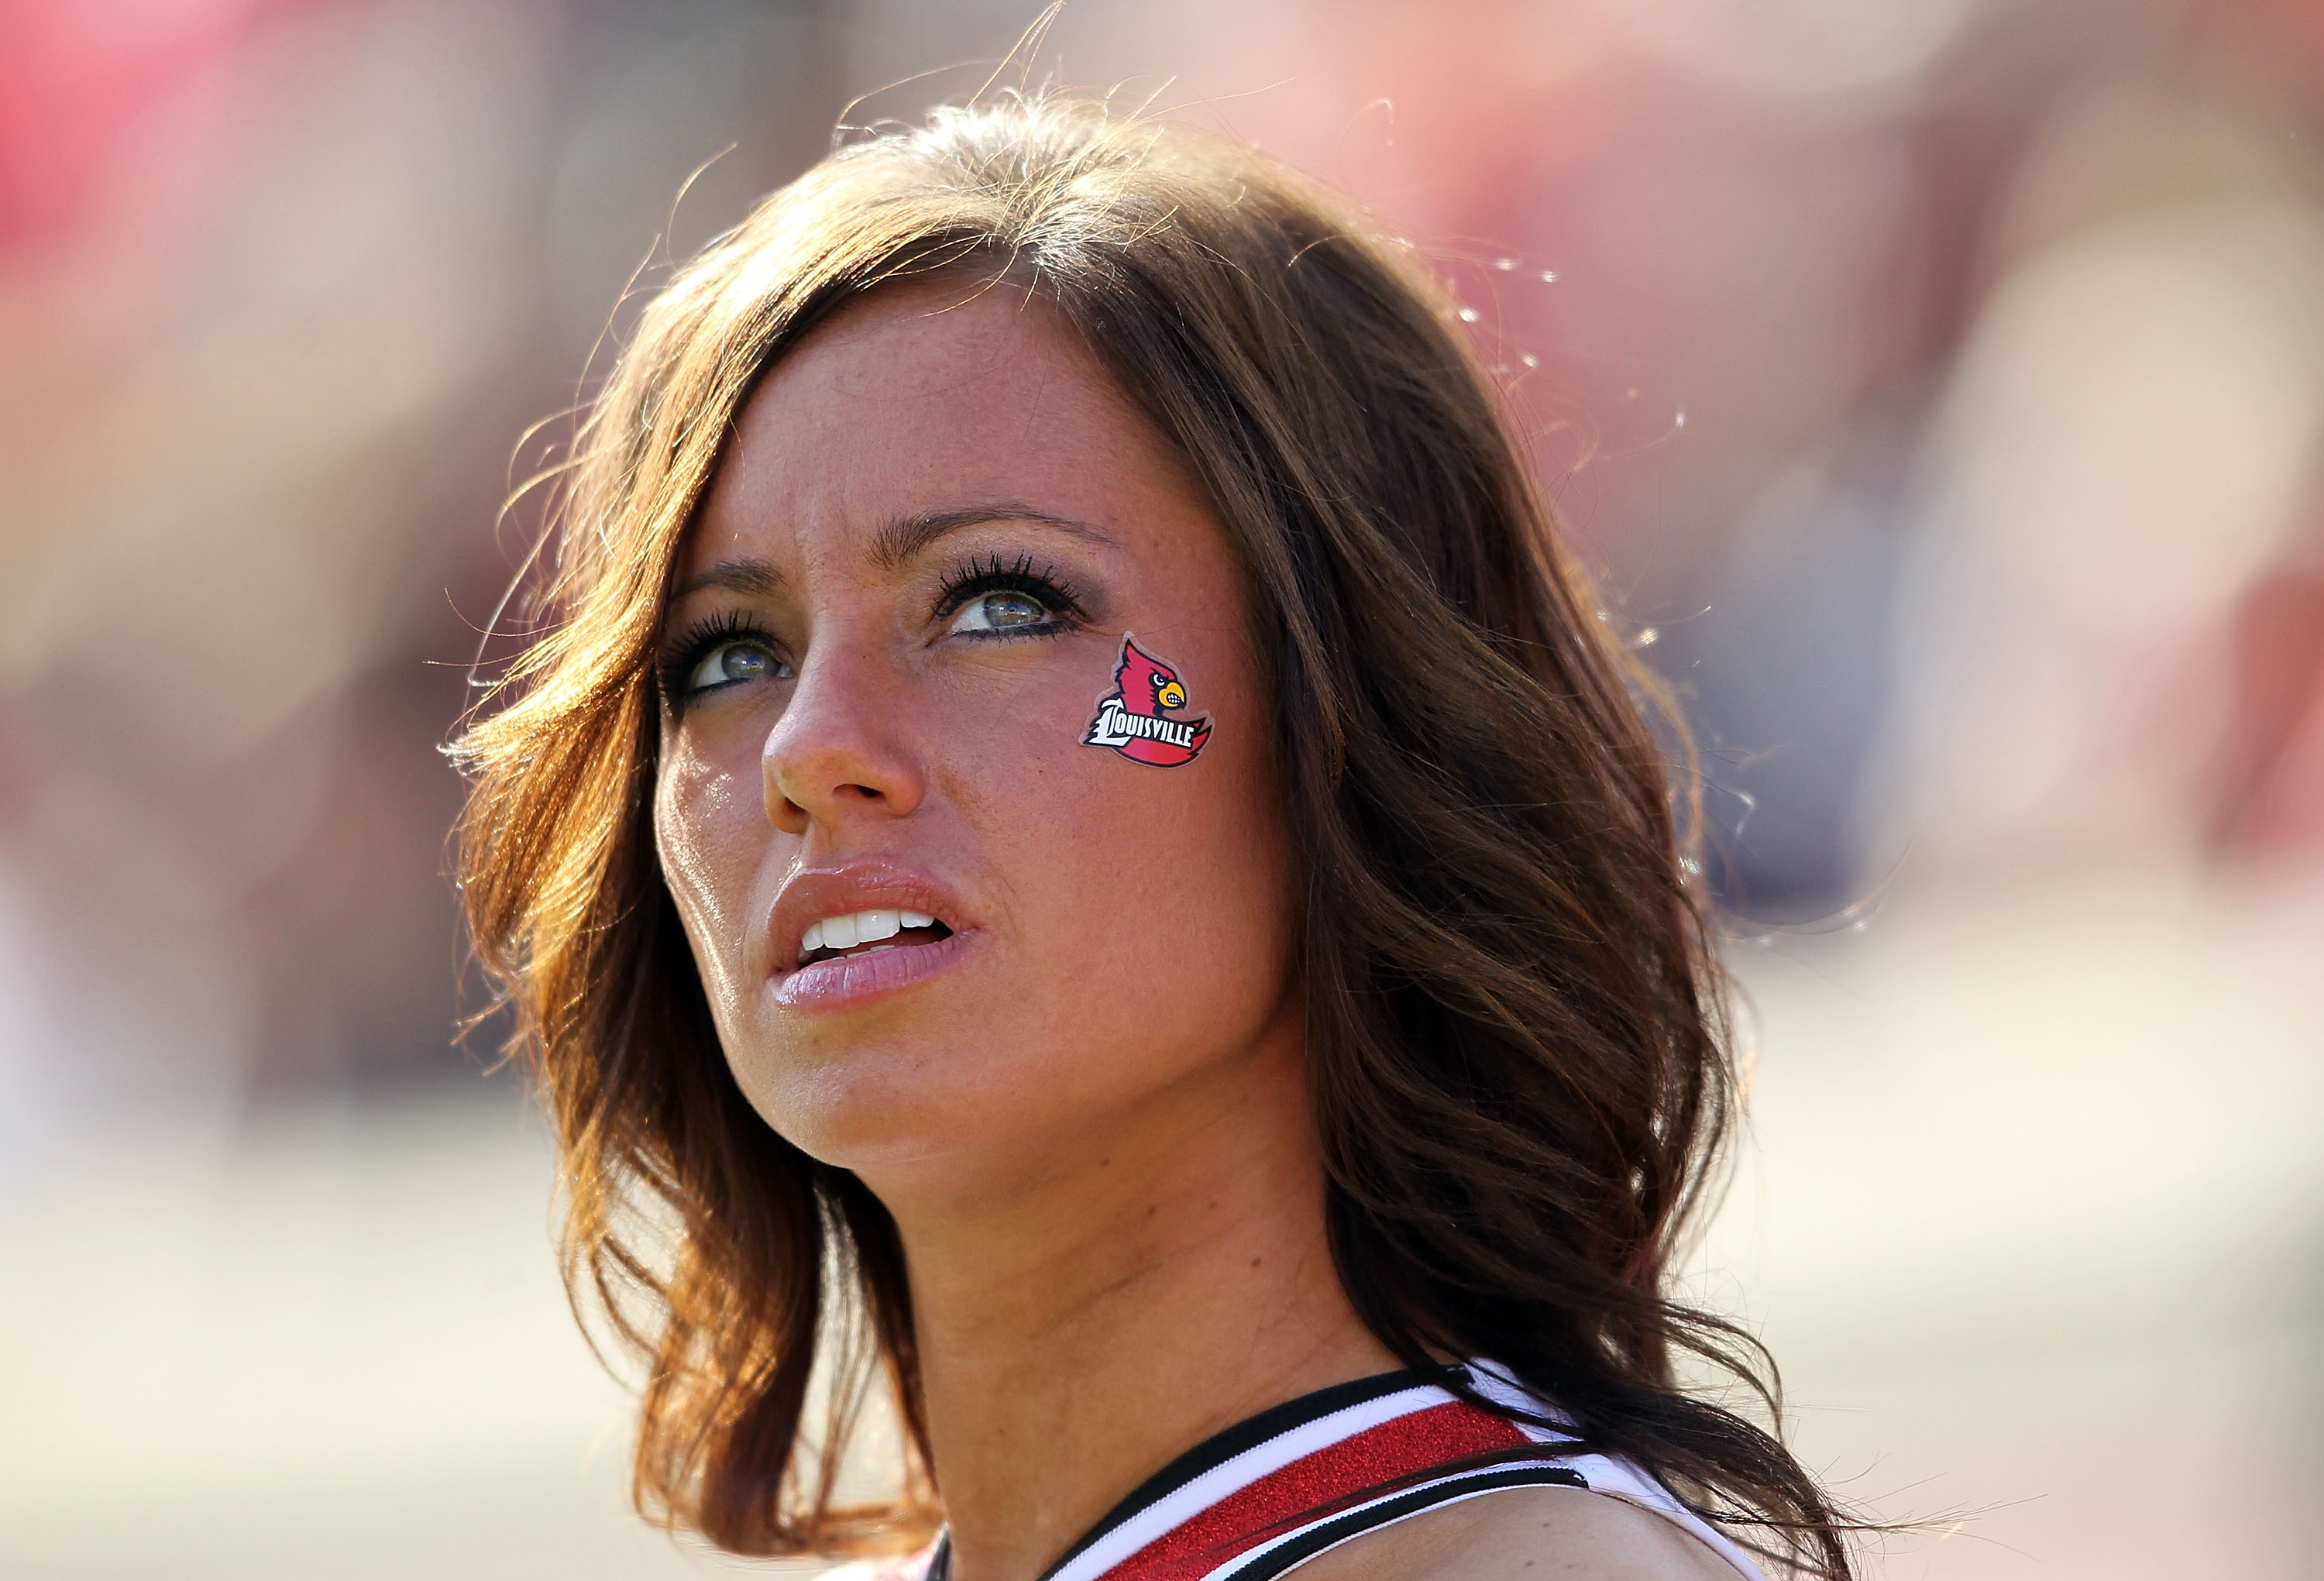 LOUISVILLE, KY - NOVEMBER 20:  A Louisville Cardinals cheerleader watches the Big East Conference game against the West Virginia Mountaineers at Papa John's Cardinal Stadium on November 20, 2010 in Louisville, Kentucky.  (Photo by Andy Lyons/Getty Images)